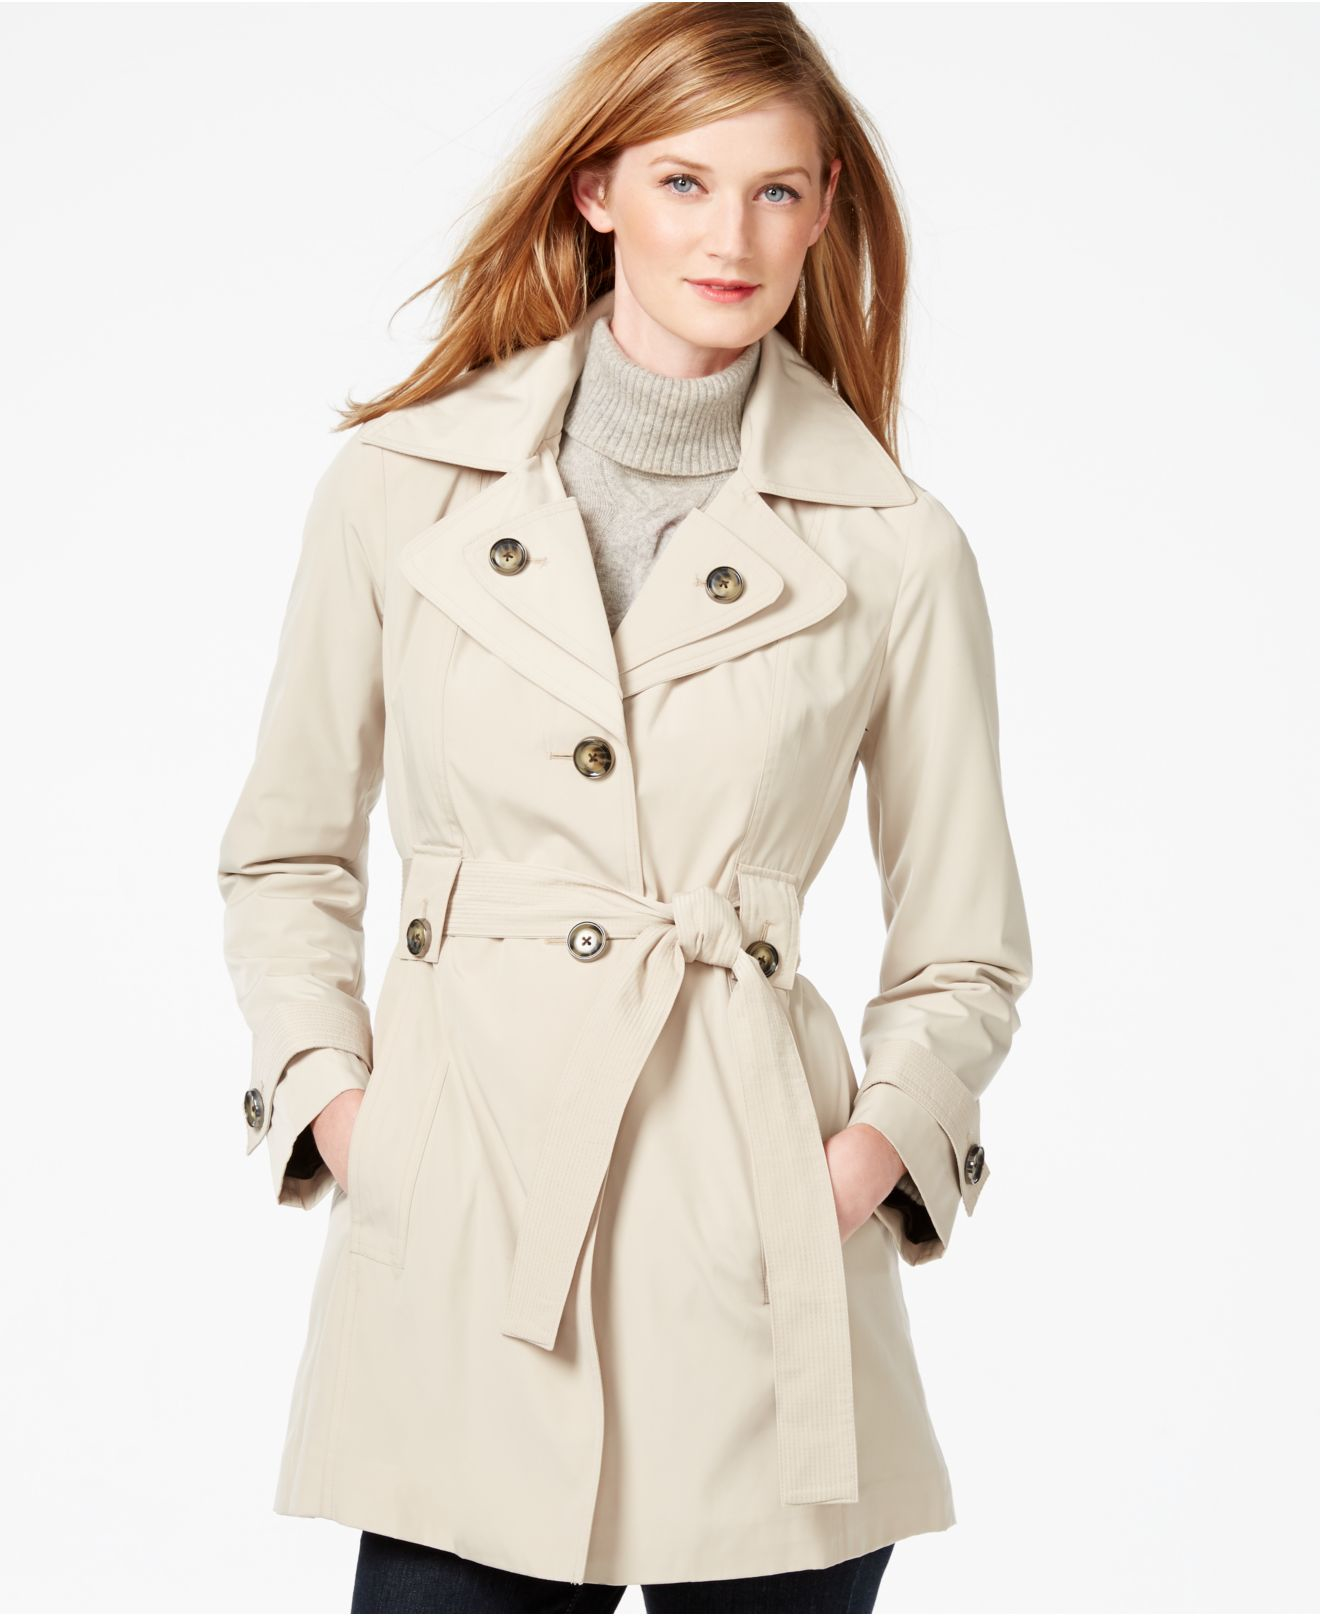 Lyst - London Fog Layered-collar Belted Trench Coat in Natural